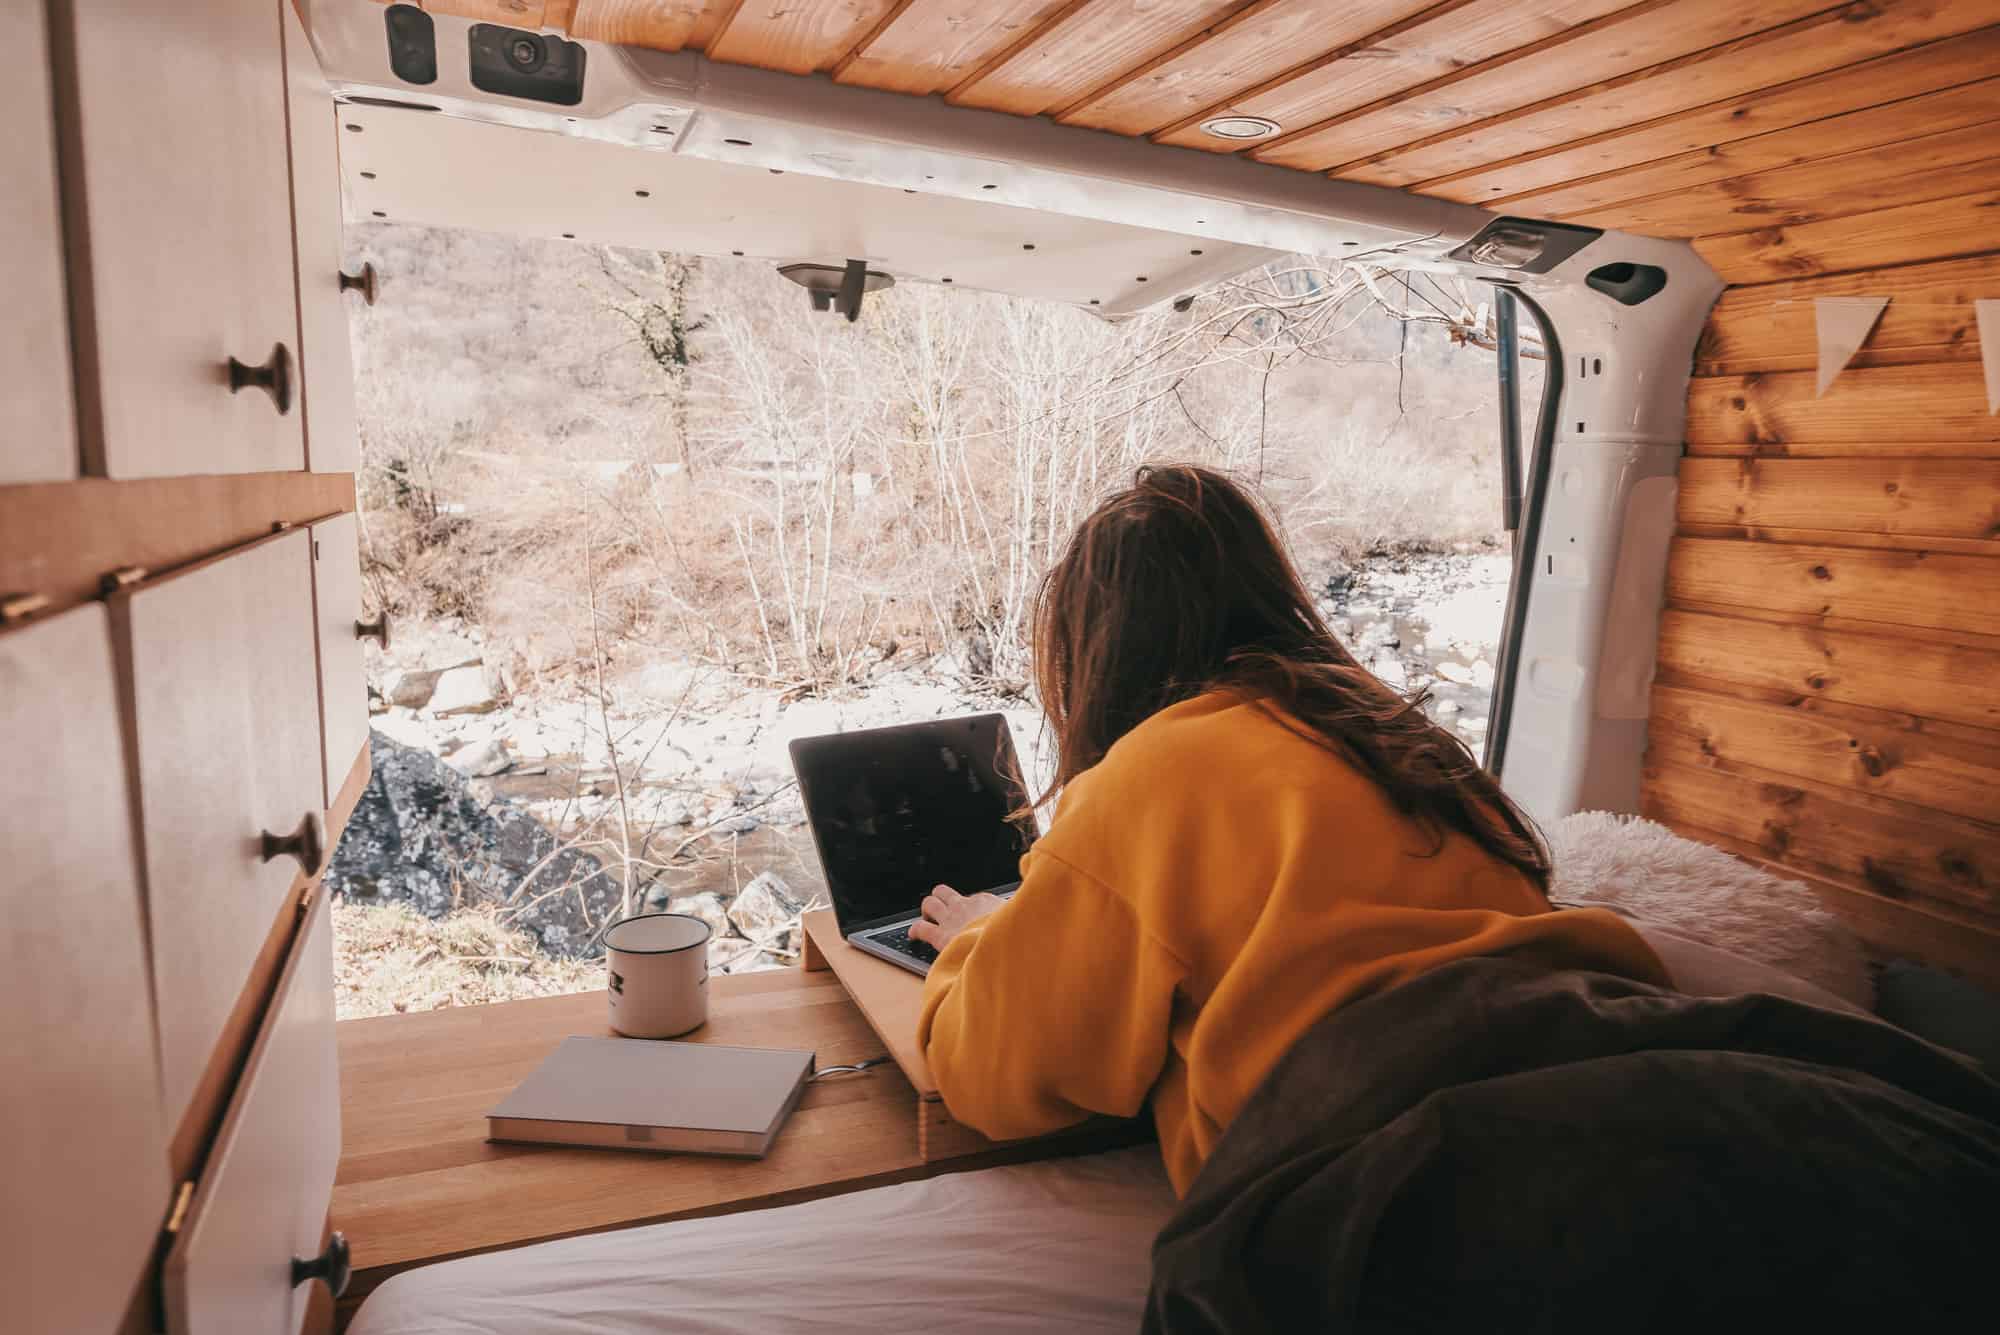 solo female vanlife tips and tips for security and safety